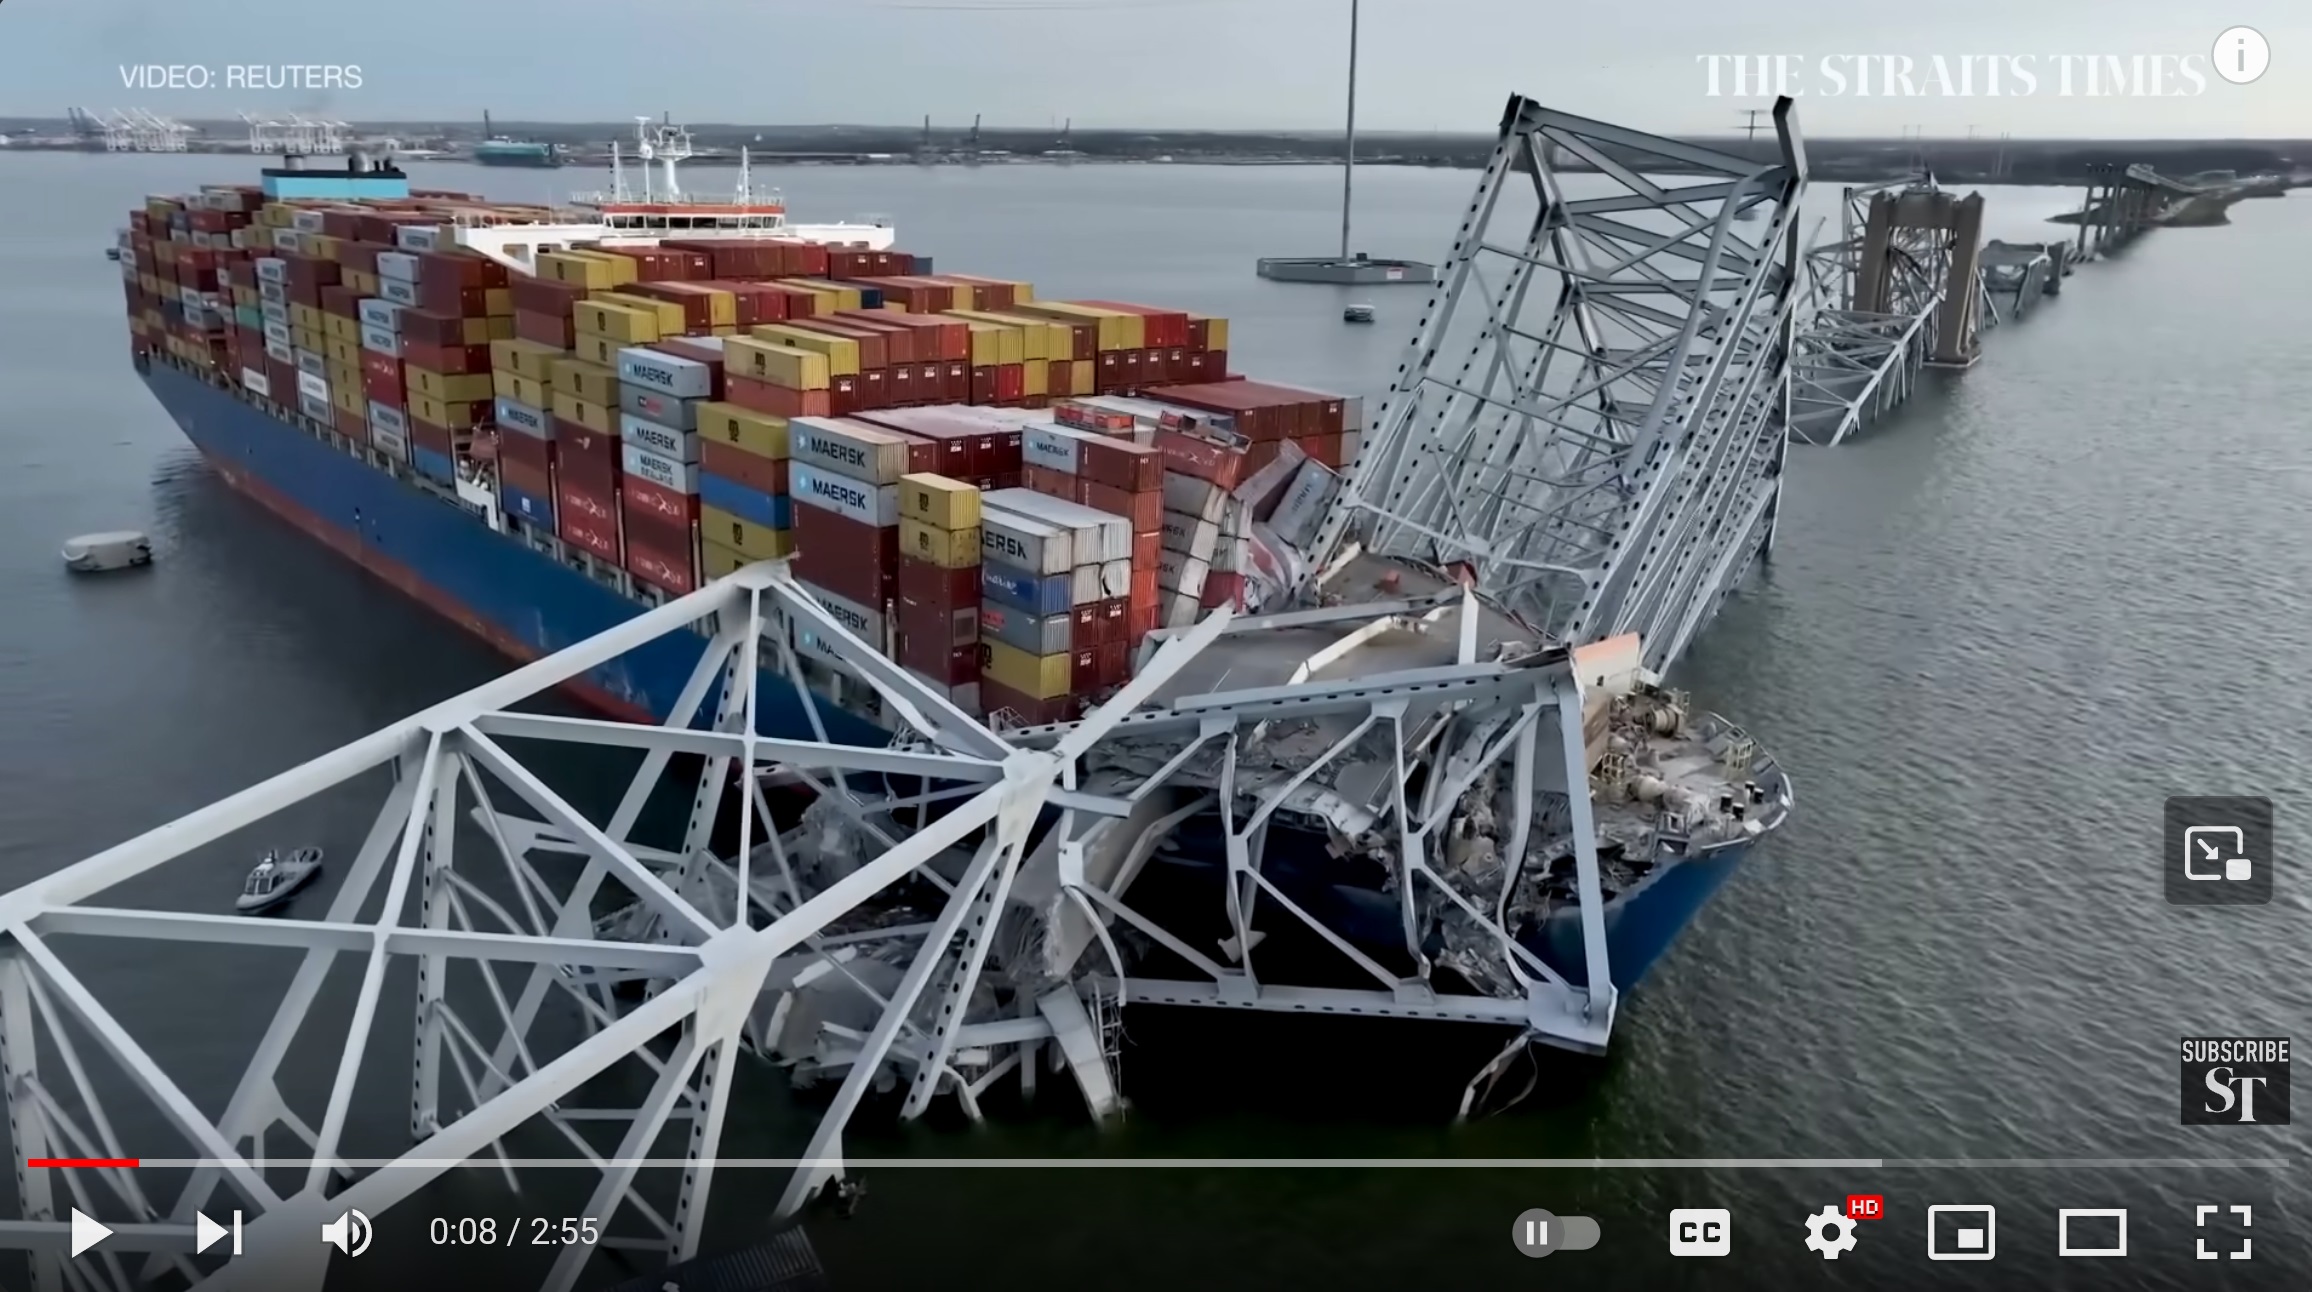 Singapore-flagged ship collision; US bridge collapses, MPA assisting in investigations